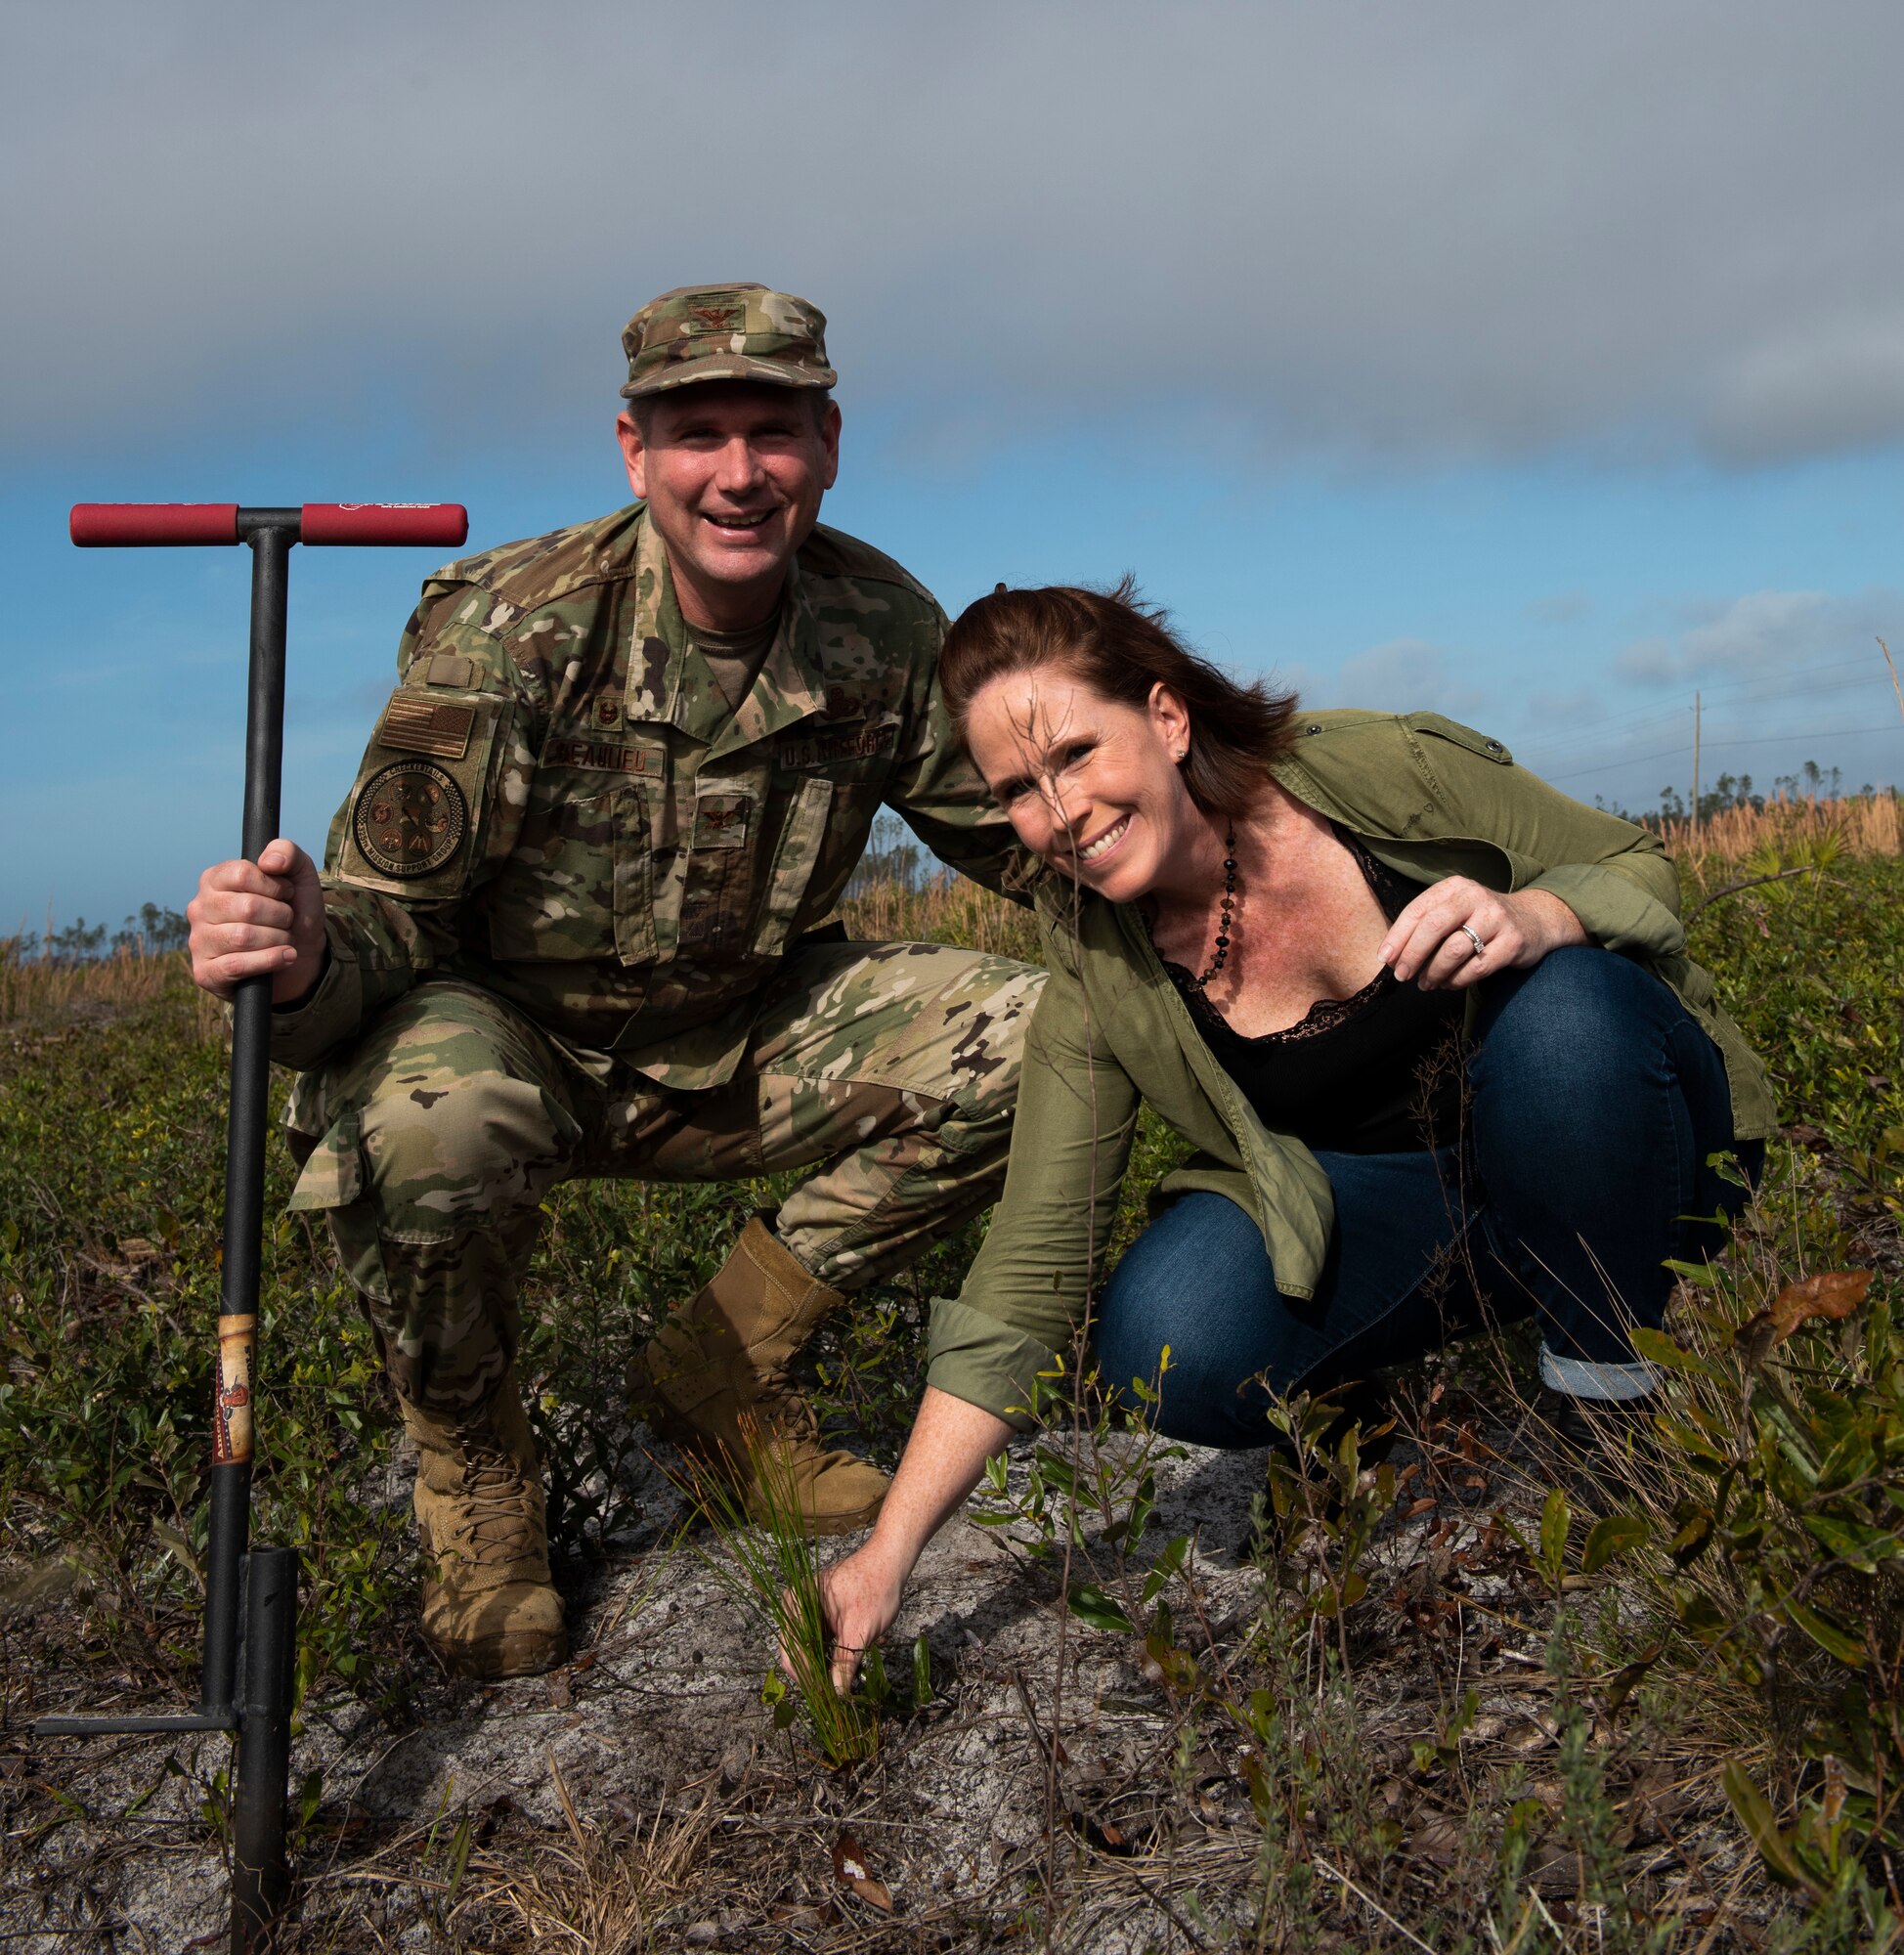 U.S. Air Force Col. Gregory Beaulieu, 325th Mission Support Group commander poses for a photo with his spouse, Amy, at Tyndall Air Force Base, Florida, Jan 15, 2020. The couple planted a longleaf pine tree as part of a long term, large scale project to restore Tyndall's ecosystem after the devastation caused by Category 5 Hurricane Michael in 2018. (U.S. Air Force photo by Staff Sgt. Magen M. Reeves)